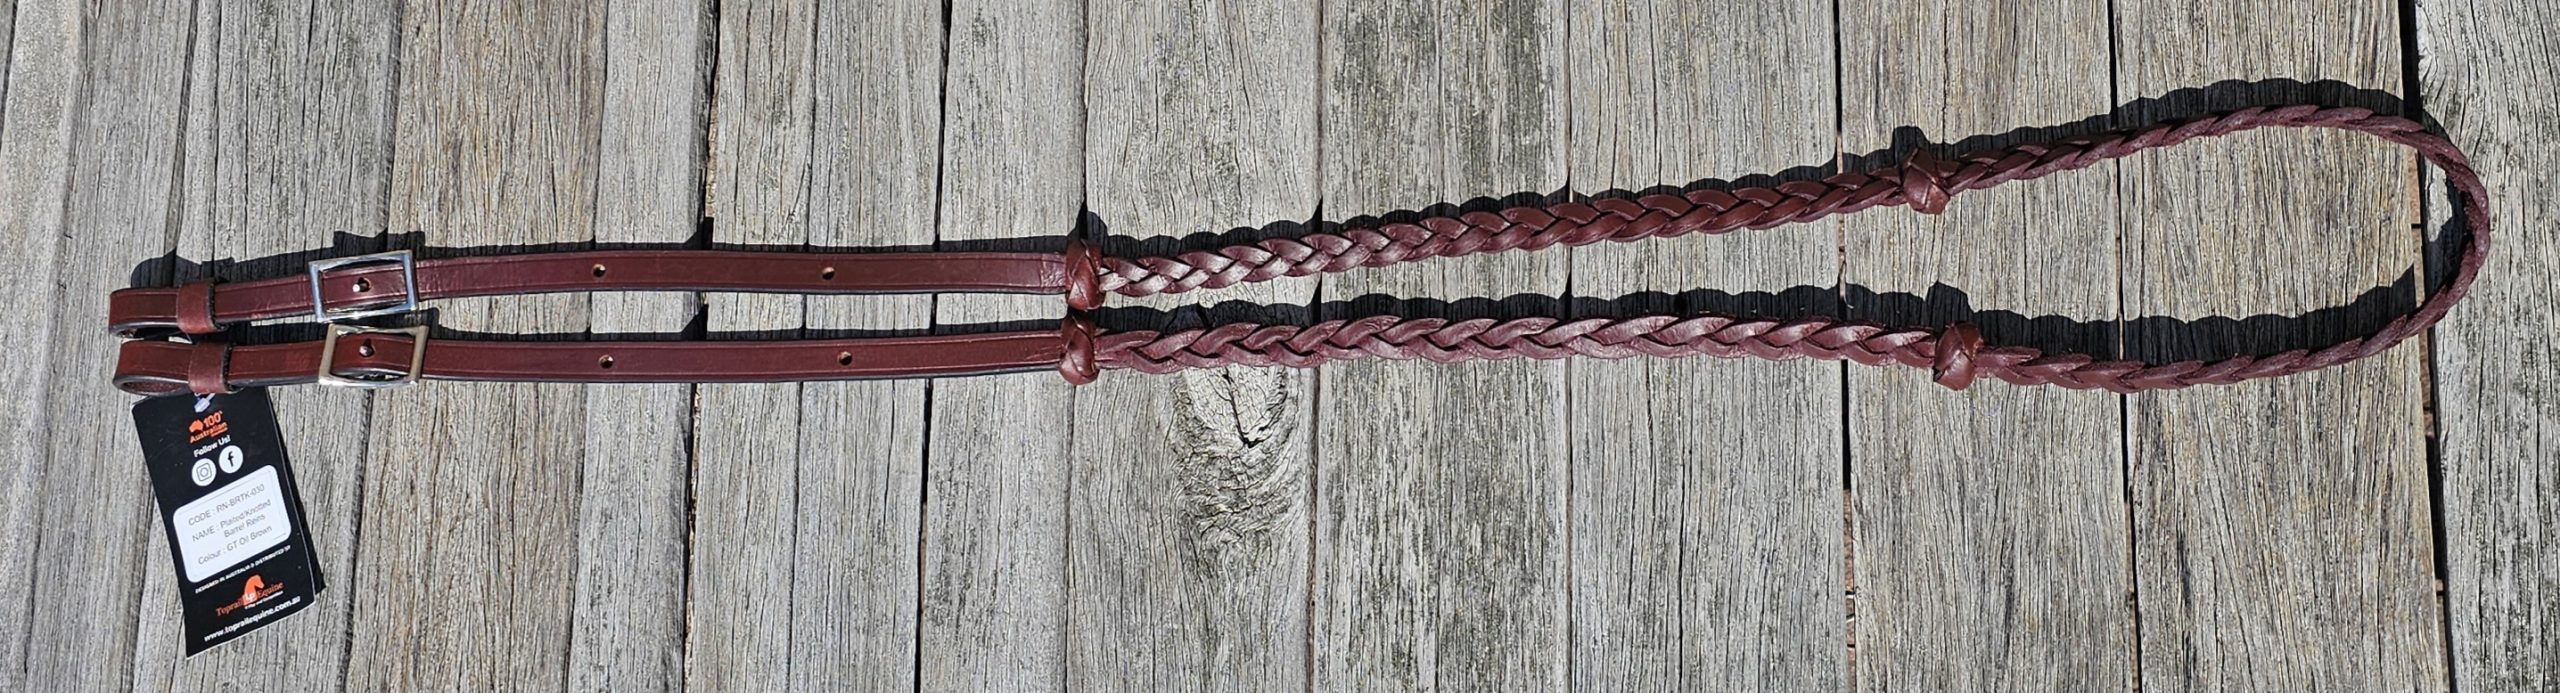 Plaited Leather Knotted Barrel Reins